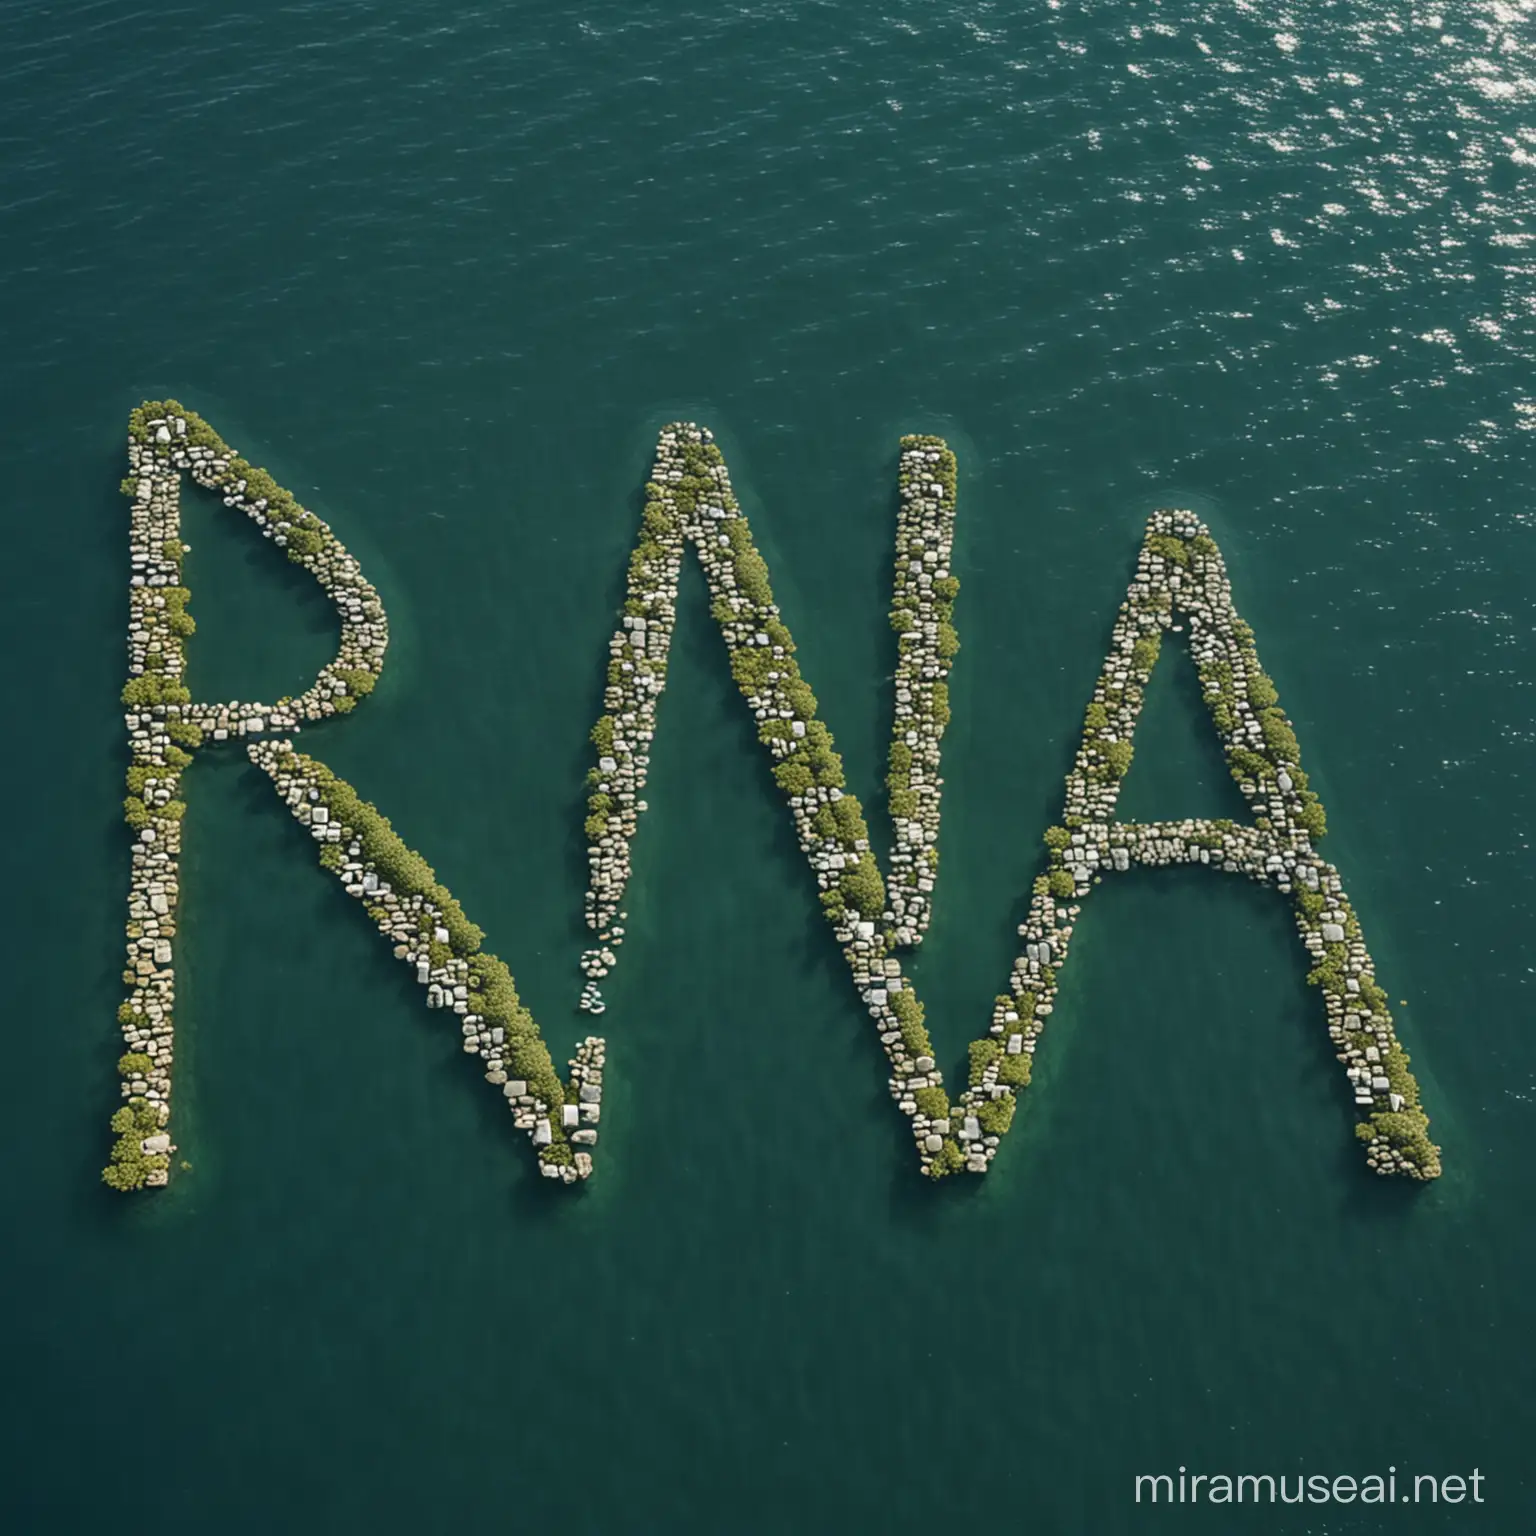 RNA Spelled Out with Tropical Islands